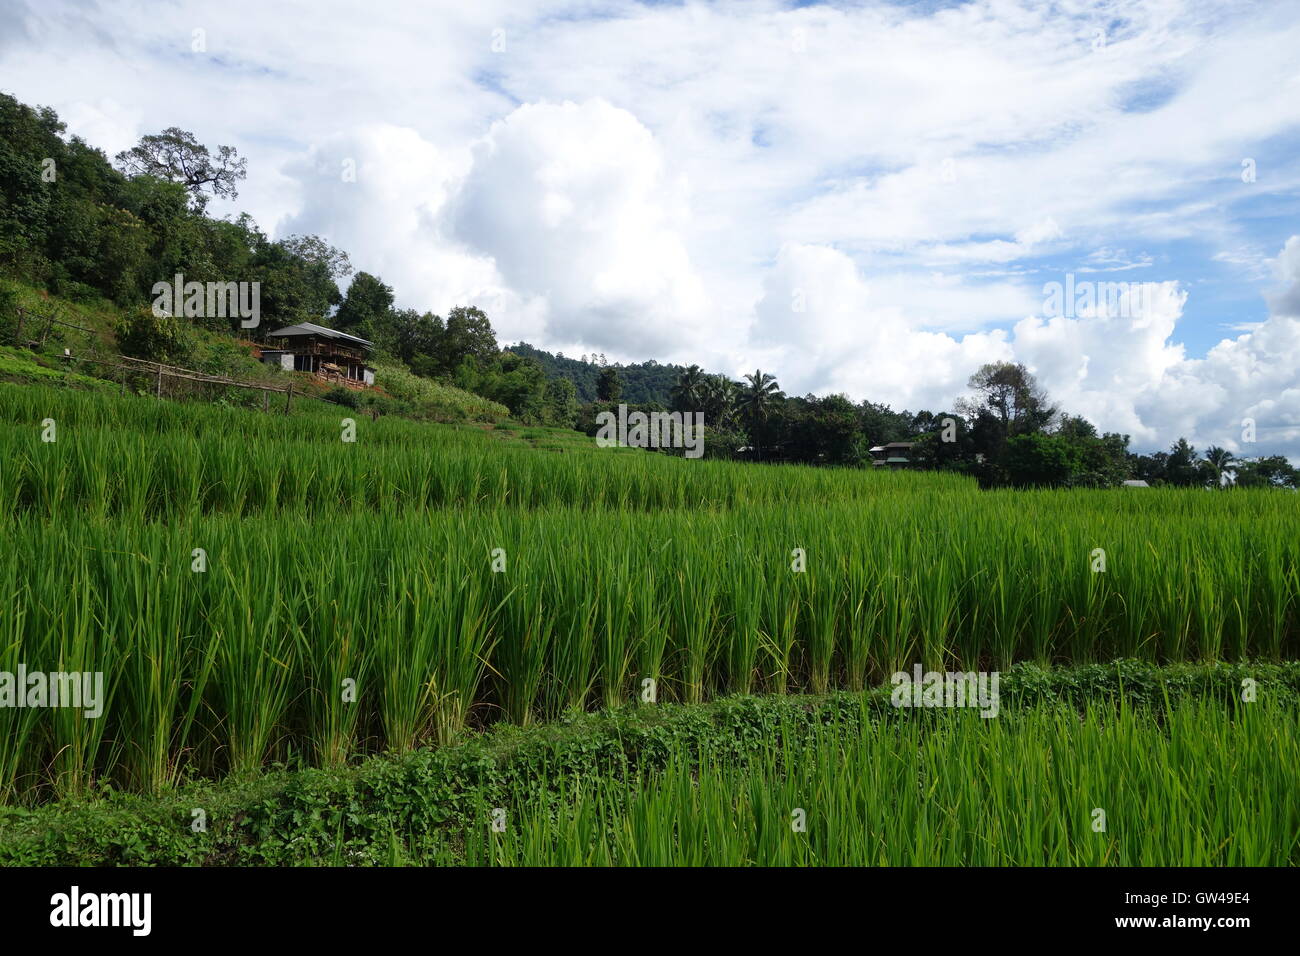 Rice paddy, rice paddies, traditional thai house, clouds, mountain, valley, Mae Chem, Chiang Mai, Thailand Stock Photo